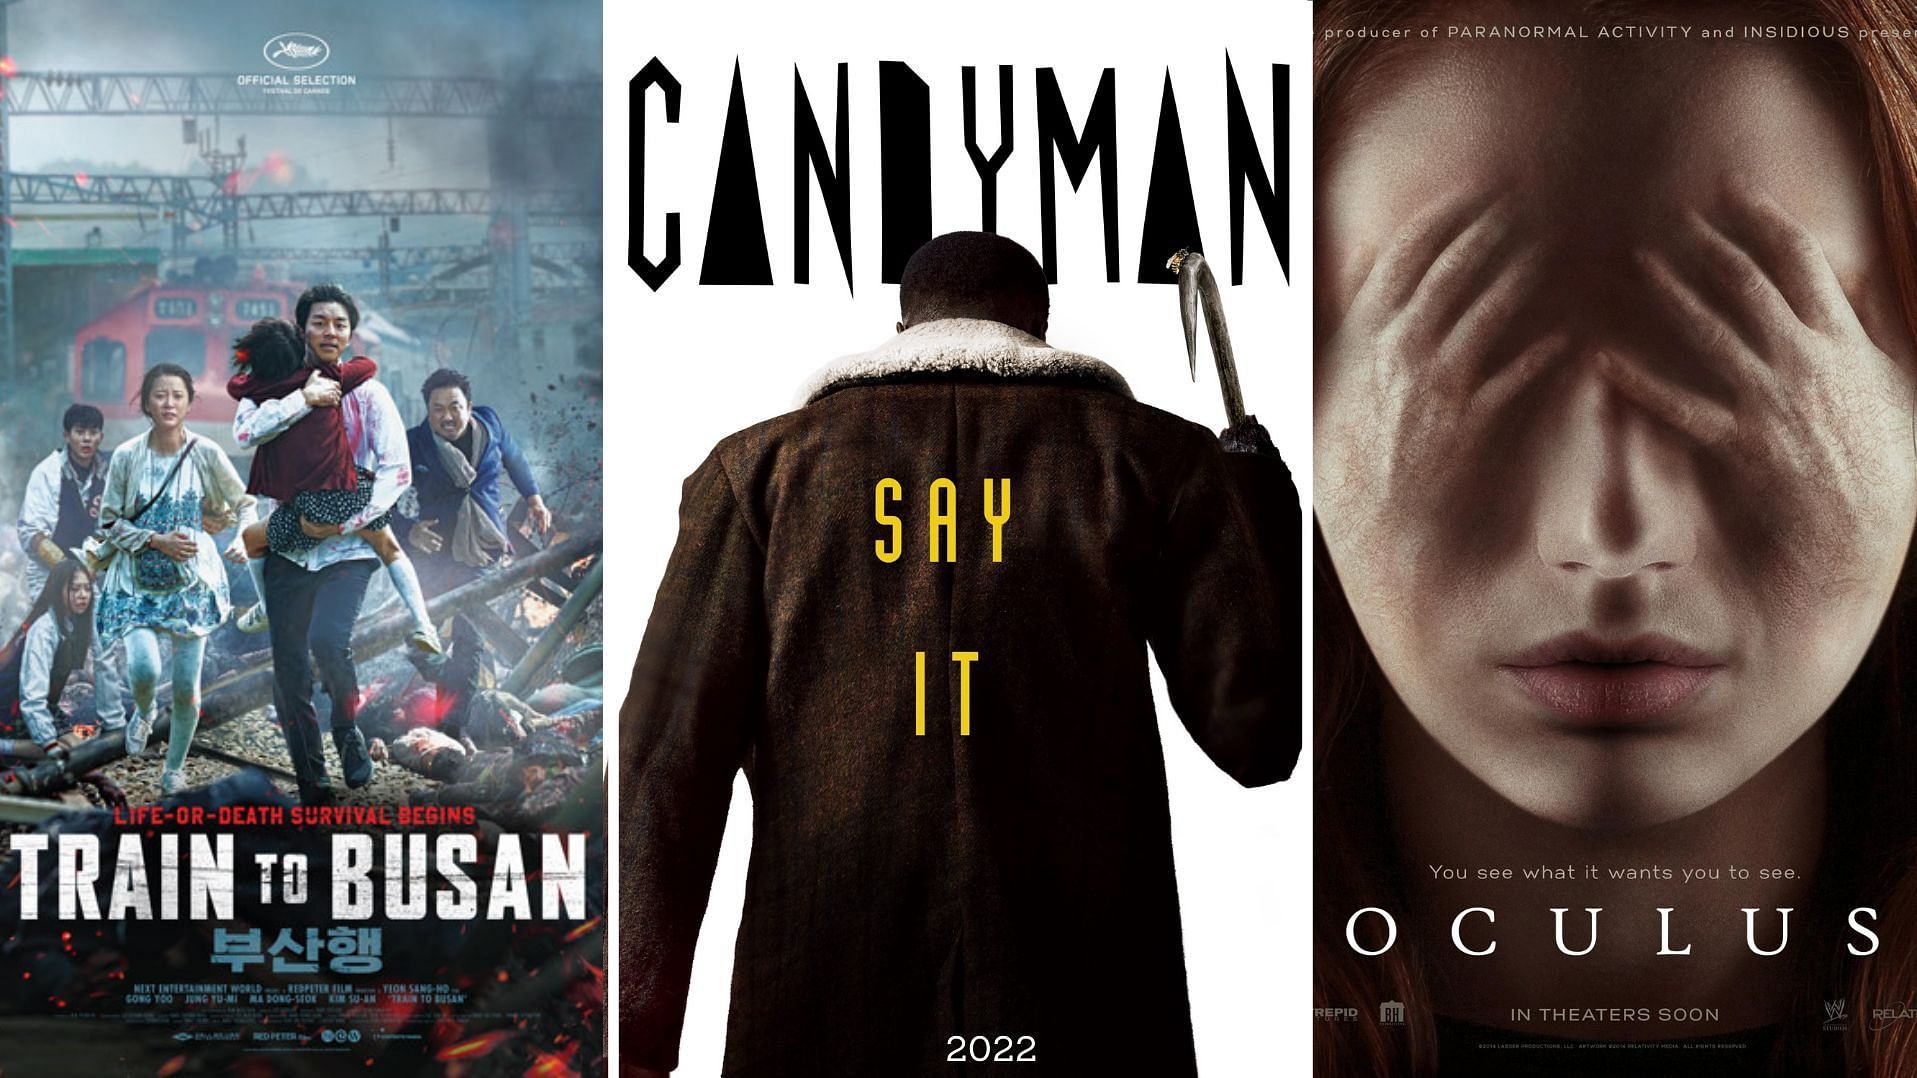 Train to Busan, Candyman and Oculus posters (Images via Next Entertainment/Universal/Blumhouse)